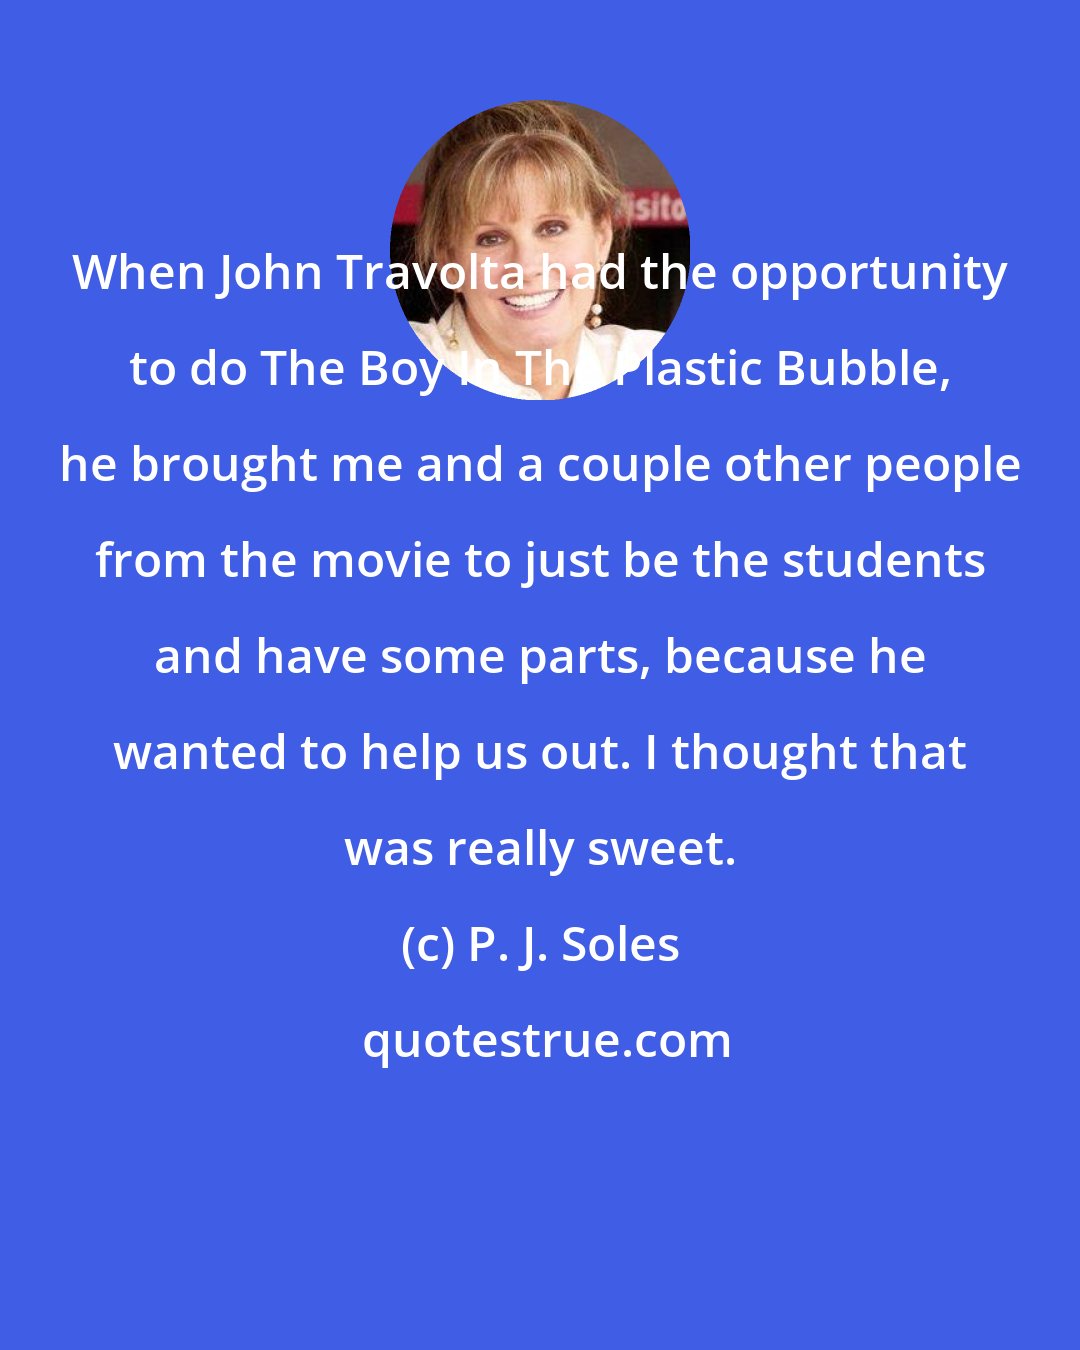 P. J. Soles: When John Travolta had the opportunity to do The Boy In The Plastic Bubble, he brought me and a couple other people from the movie to just be the students and have some parts, because he wanted to help us out. I thought that was really sweet.